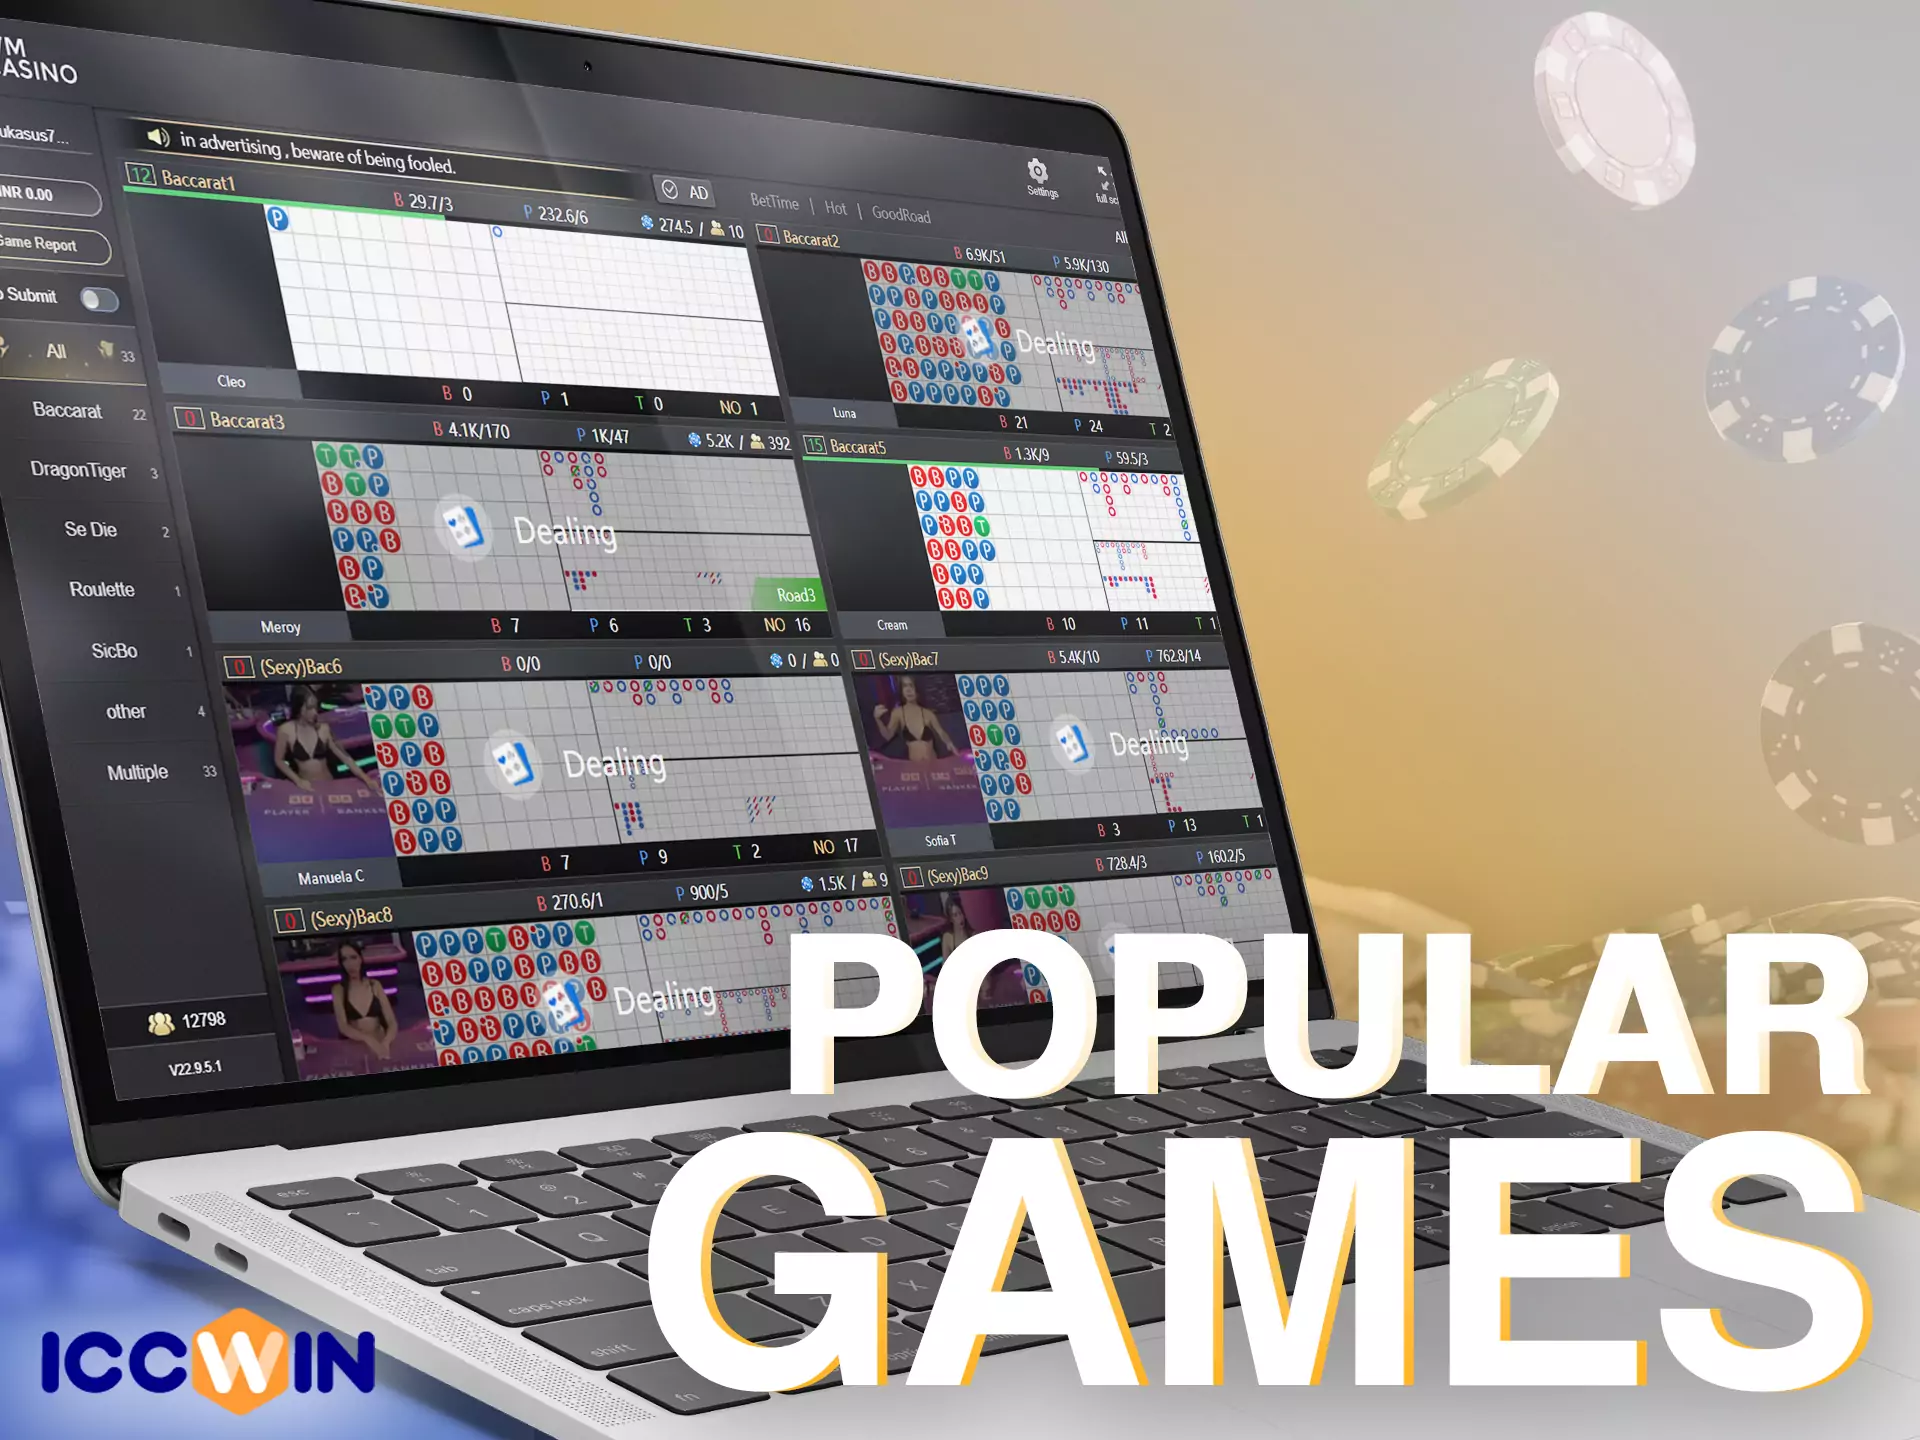 Slot games are the most popular among ICCWin users.